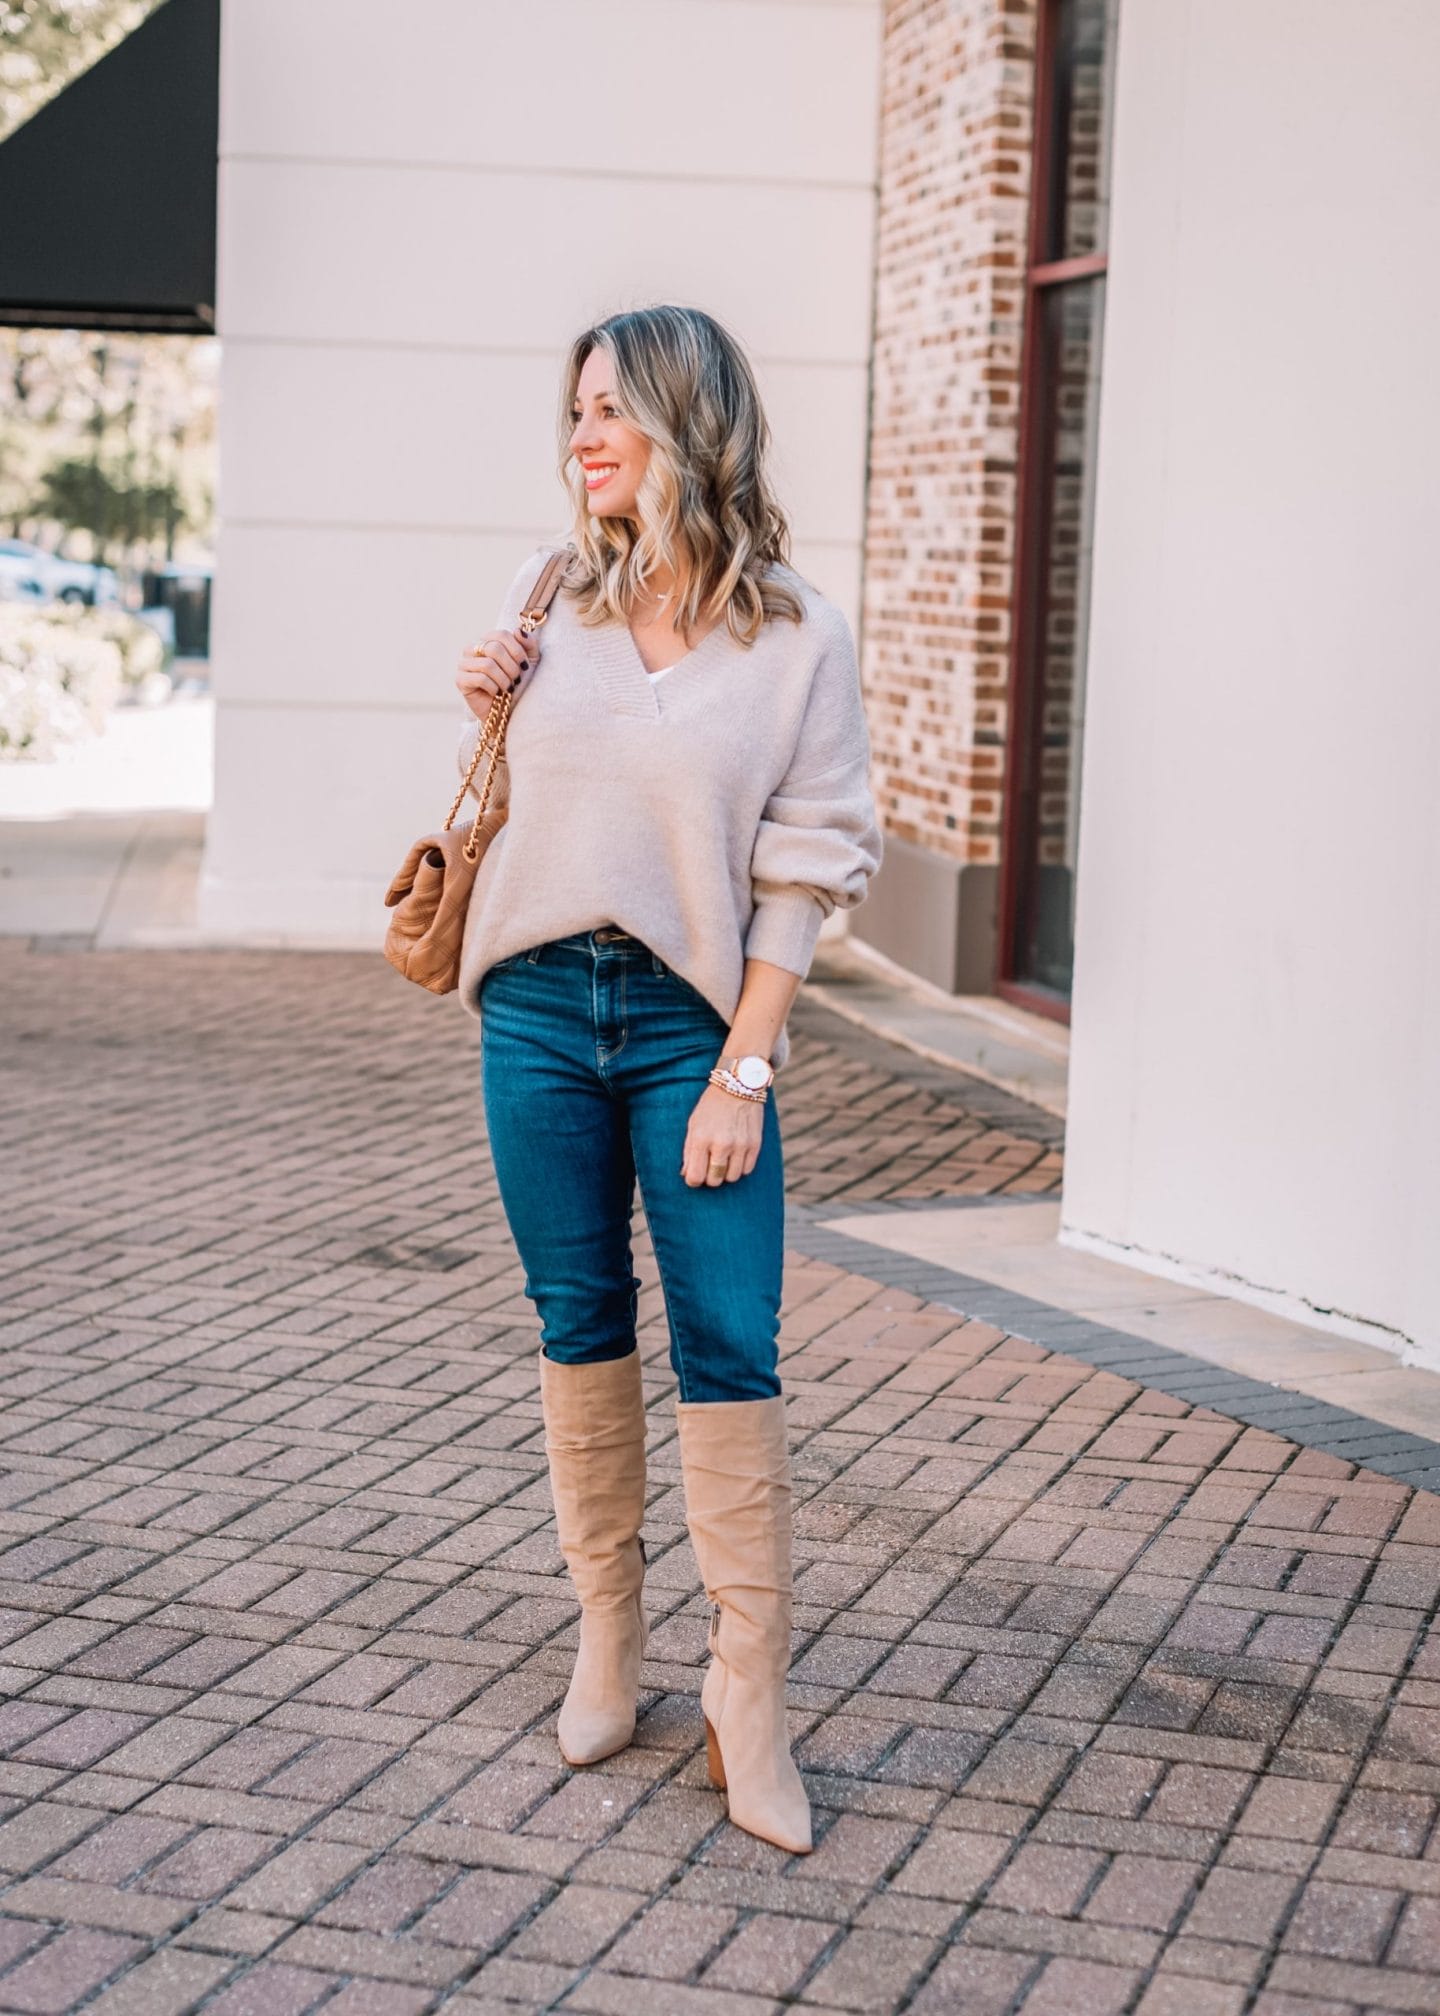 Express Fashion Finds, V-Neck Sweater, Skinny Jeans, Knee High Boots